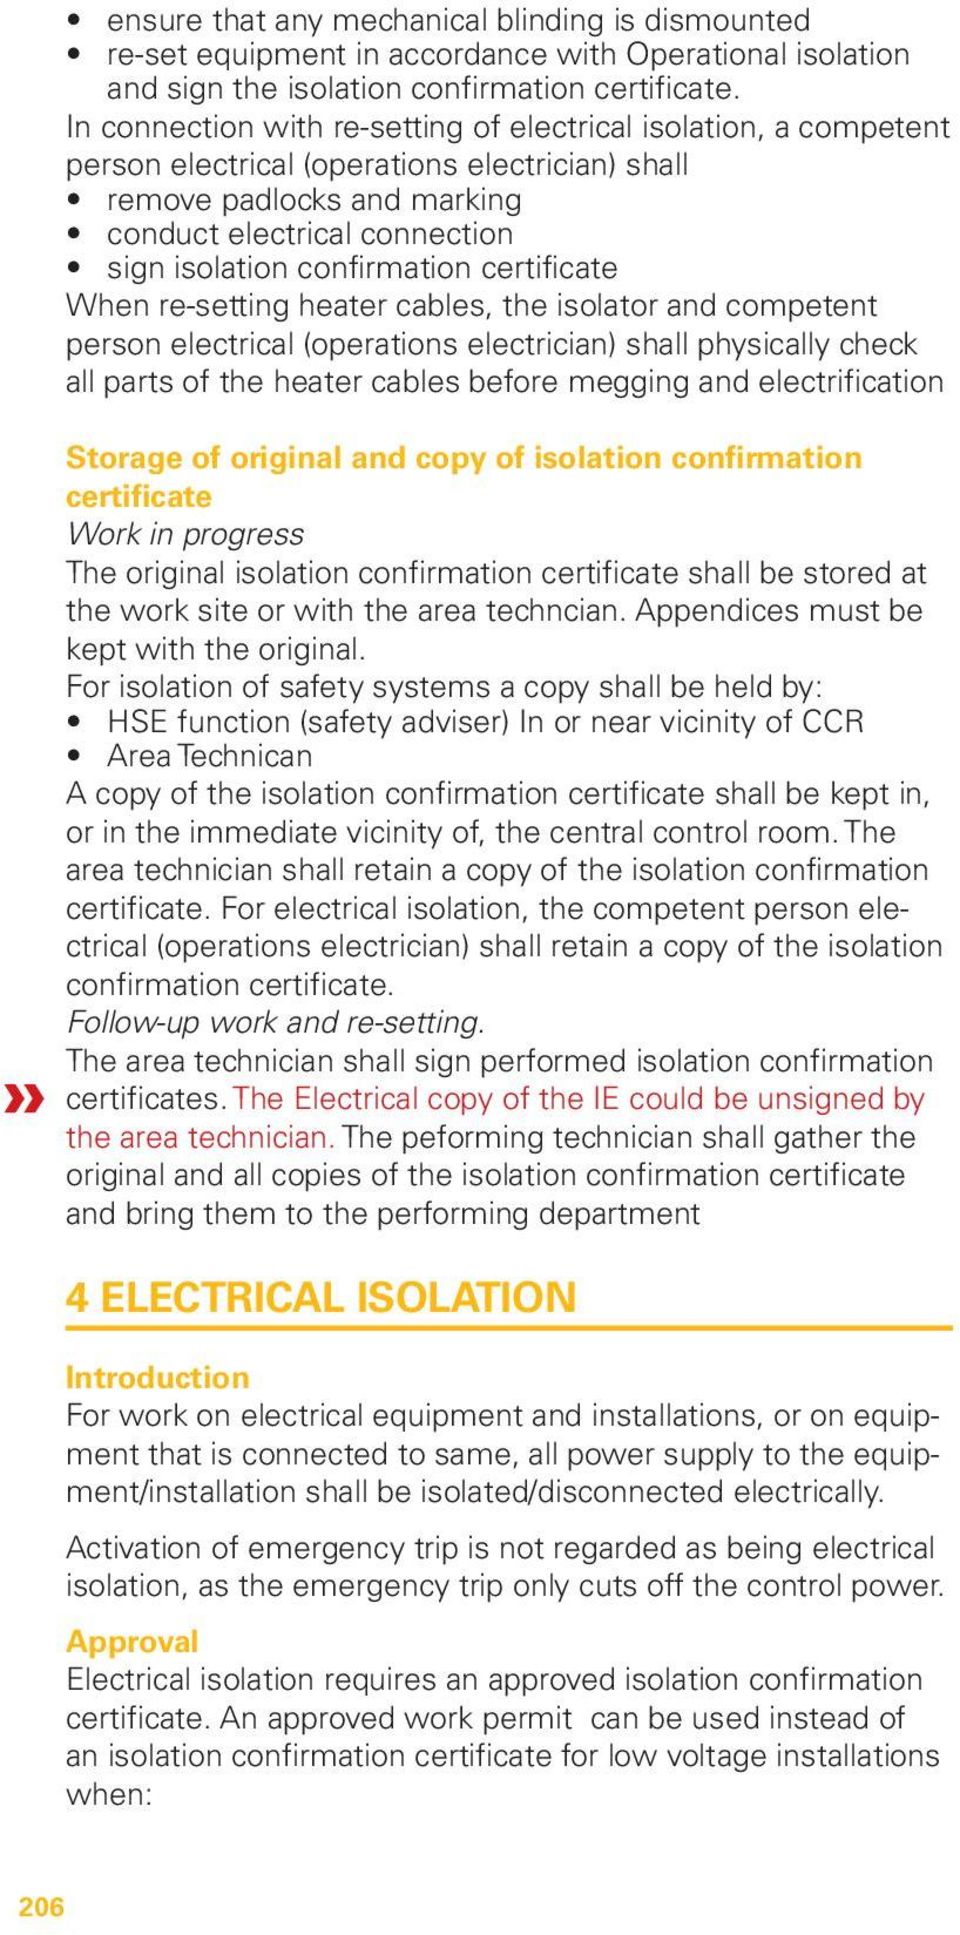 confirmation certificate When re-setting heater cables, the isolator and competent person electrical (operations electrician) shall physically check all parts of the heater cables before megging and